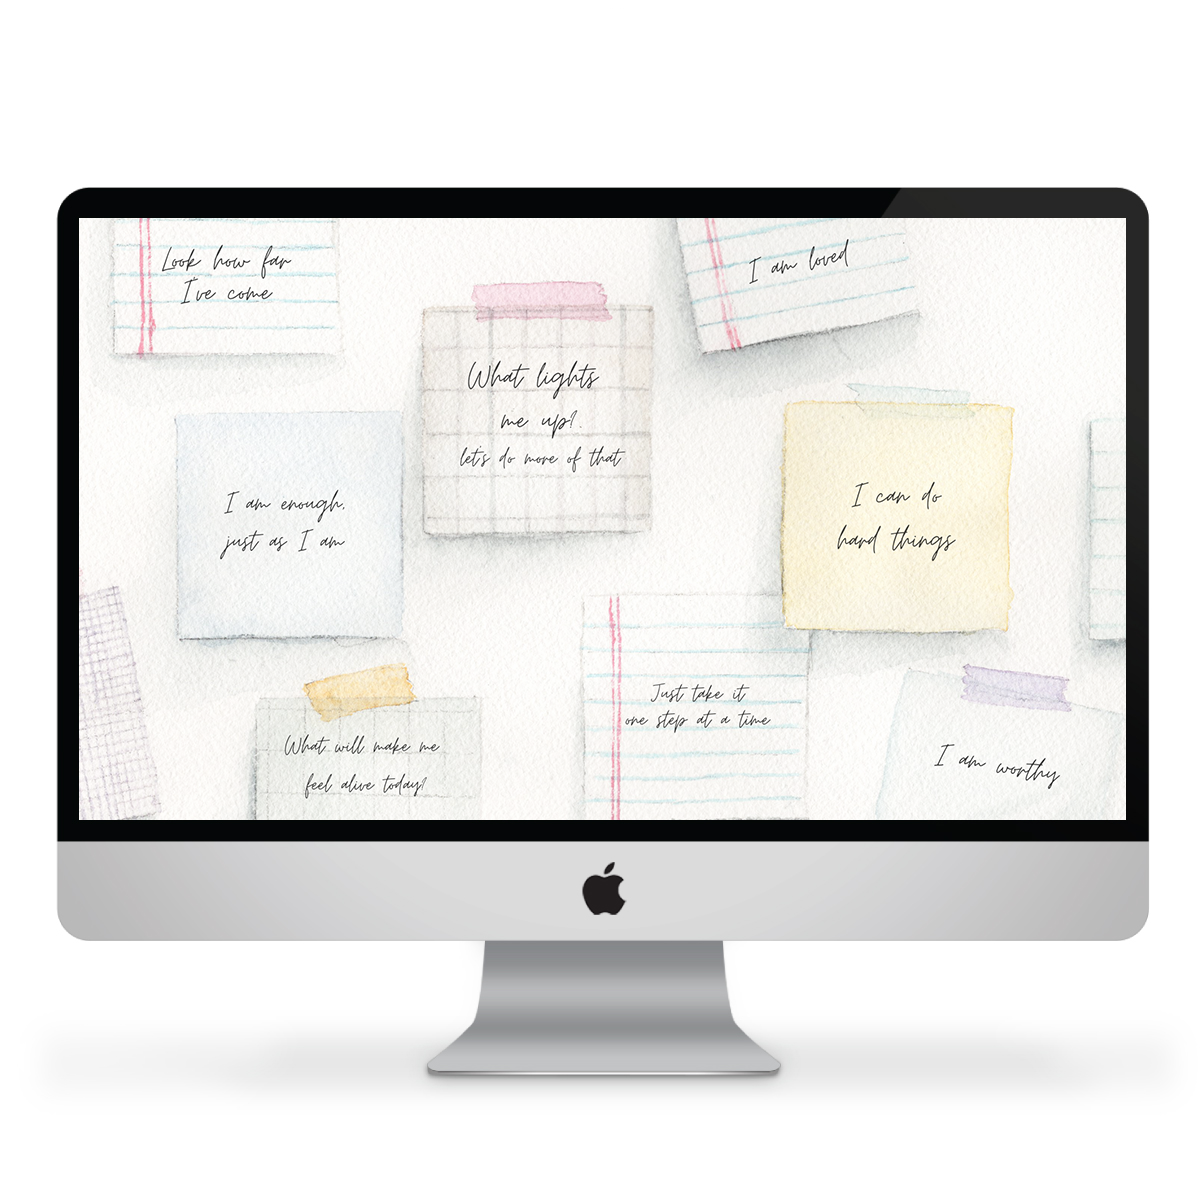 Dress up your tech: sticky notes |  lark and flax